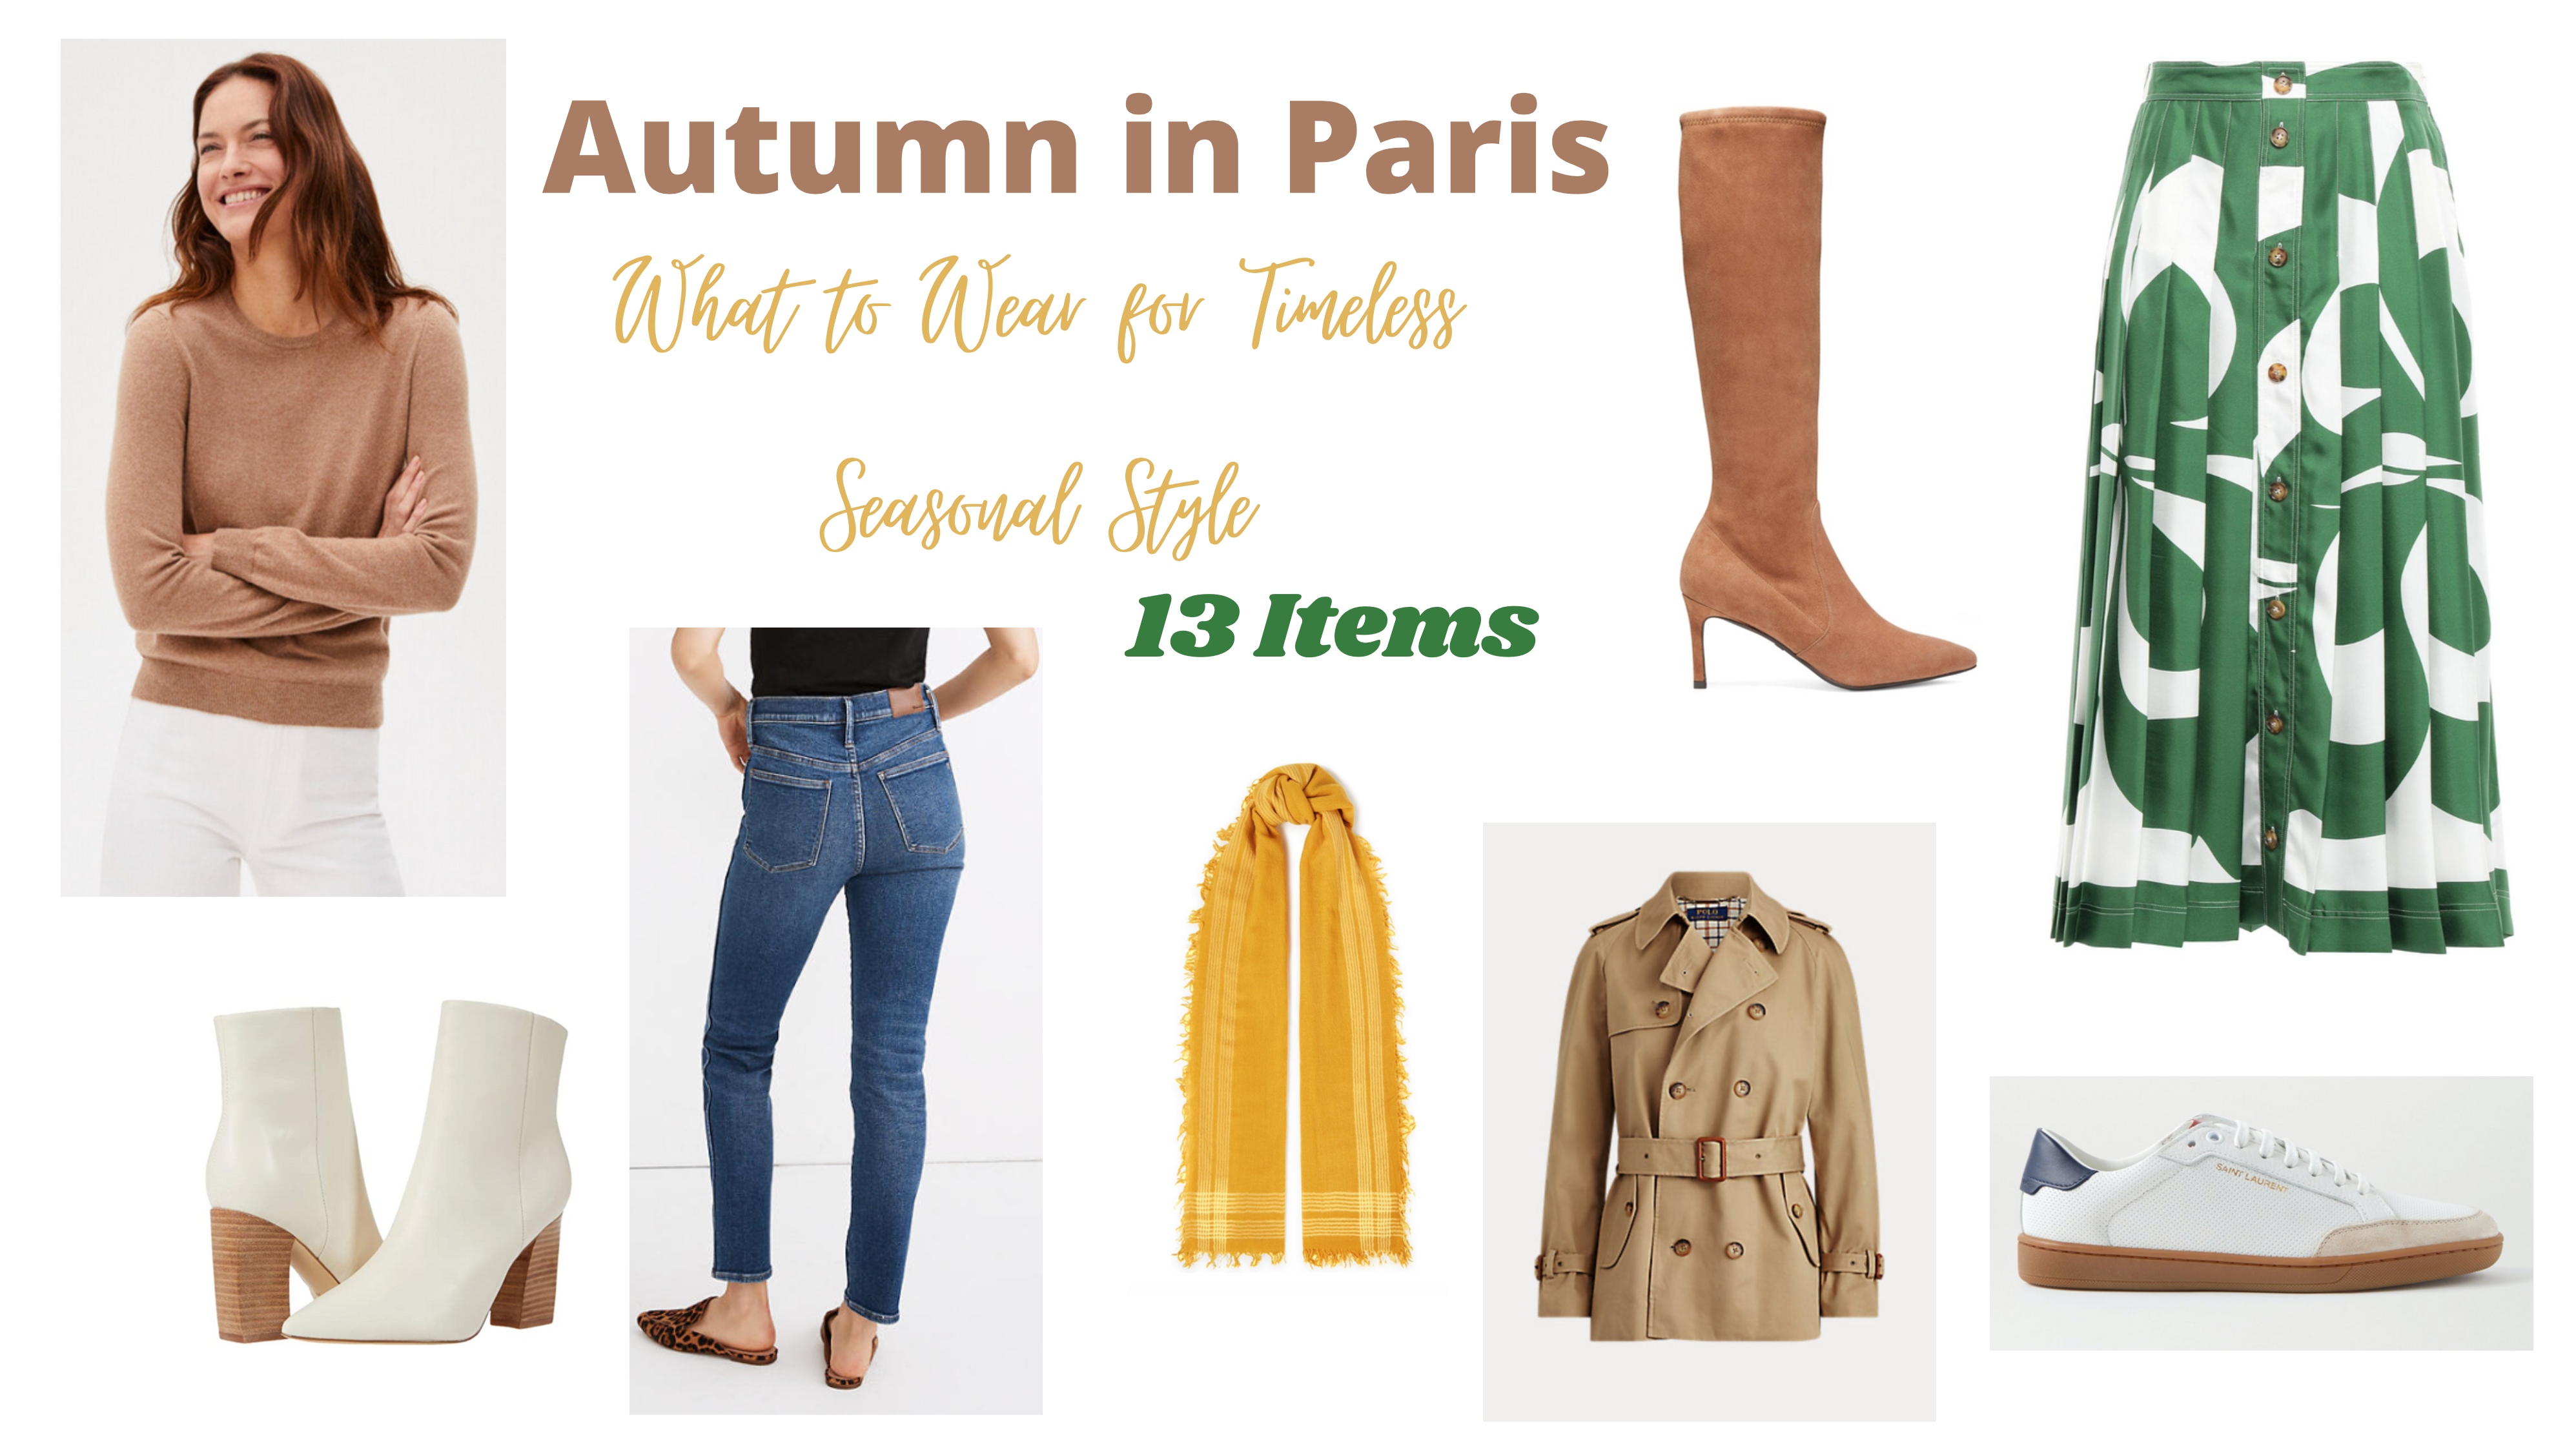 267: Autumn in Paris – What to Wear for Timeless Seasonal Style